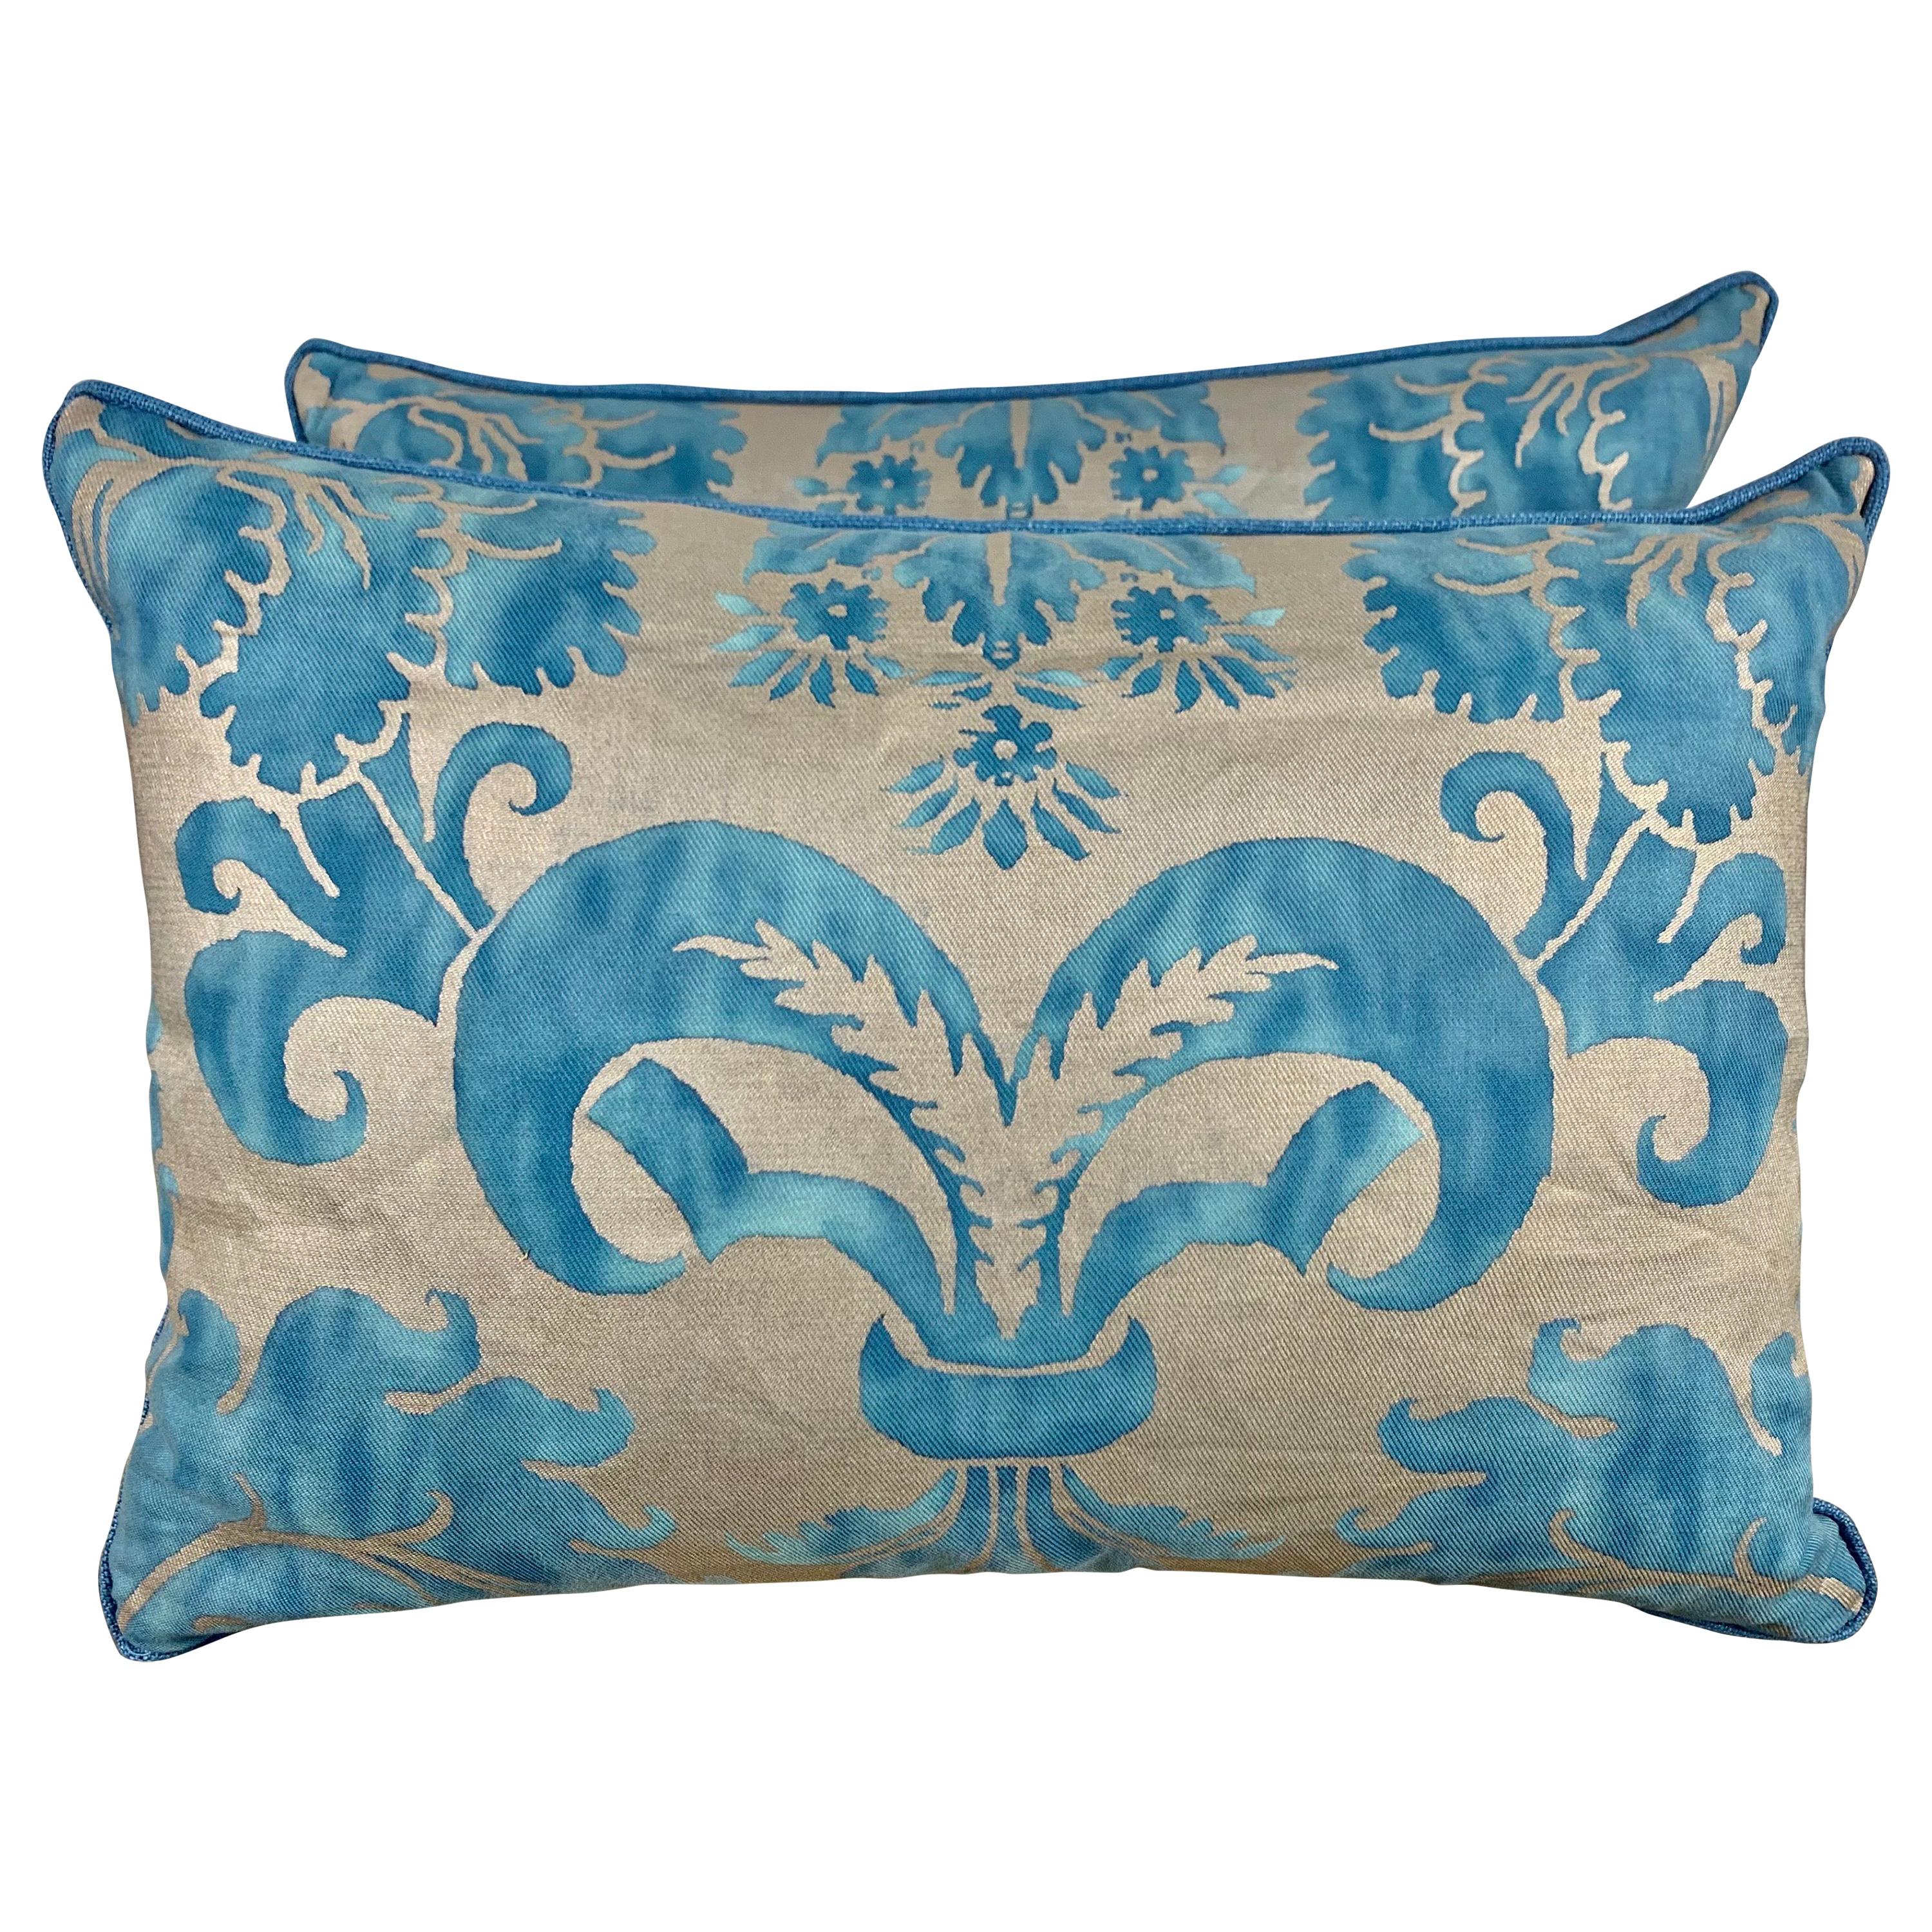 Pair of Blue and Silver Glicine Patterned Fortuny Pillows